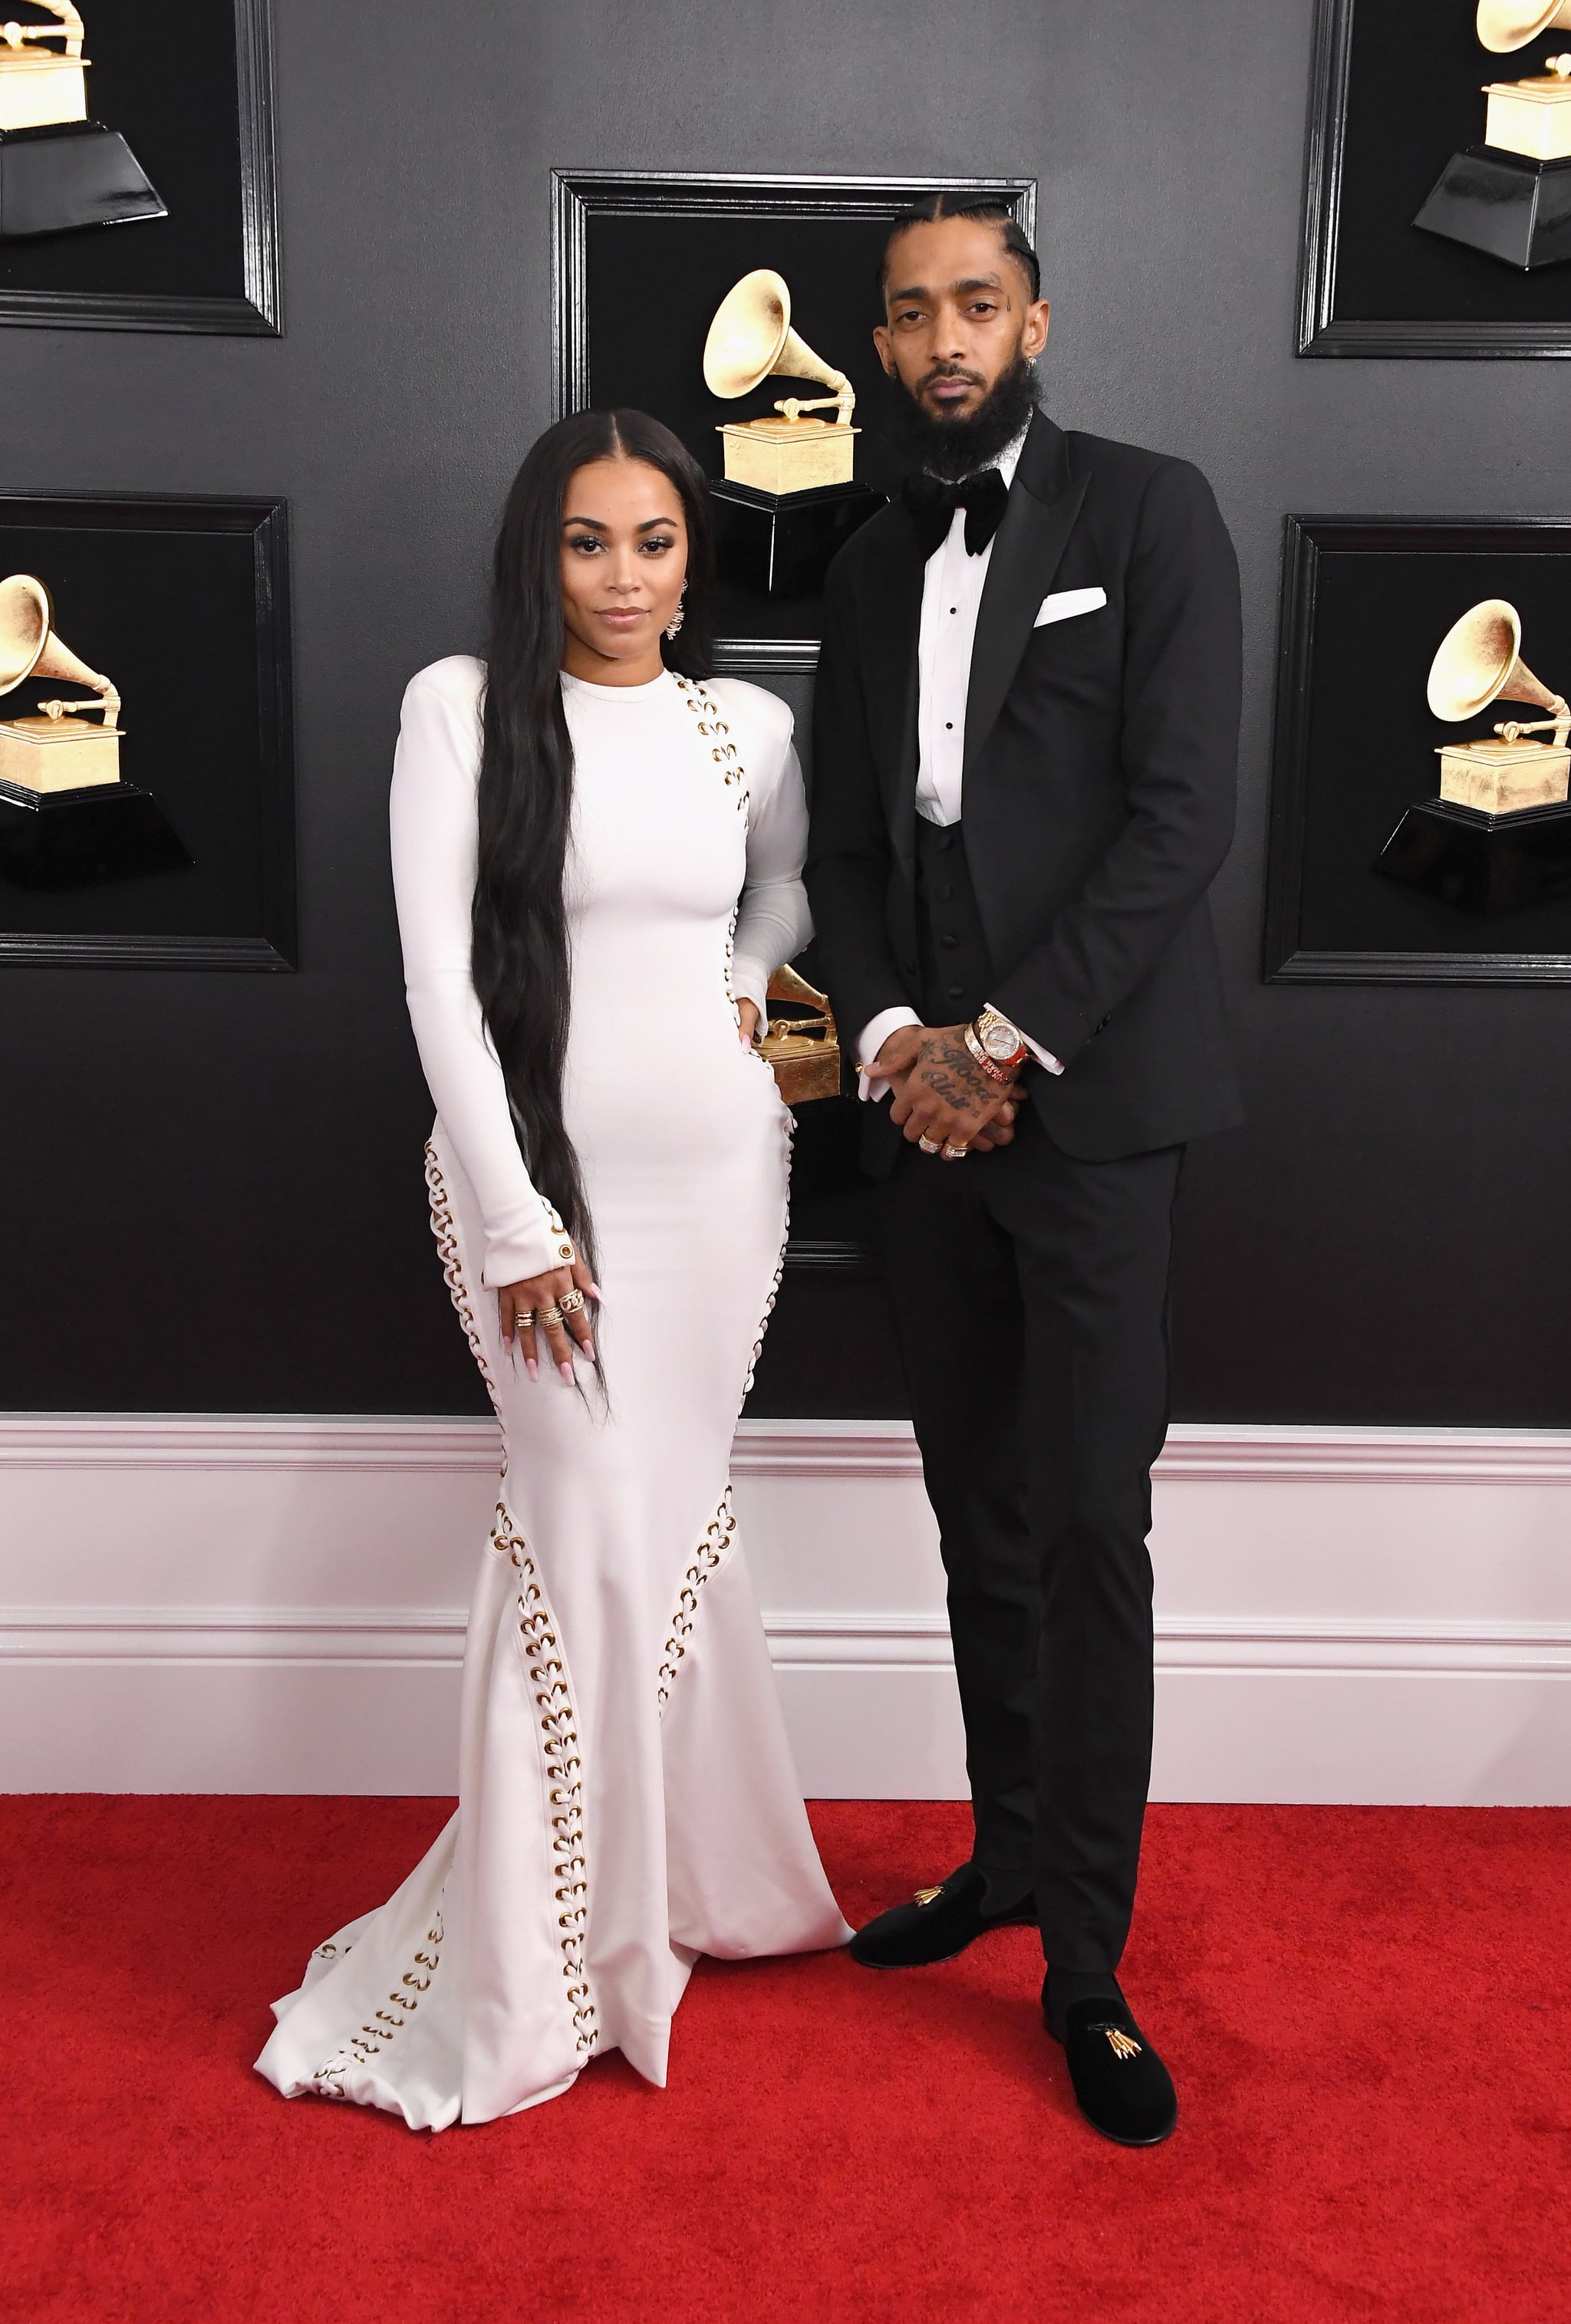 LOS ANGELES, CA - FEBRUARY 10:  Lauren London (L) and Nipsey Hussle attend the 61st Annual GRAMMY Awards at Staples Centre on February 10, 2019 in Los Angeles, California.  (Photo by Steve Granitz/WireImage)